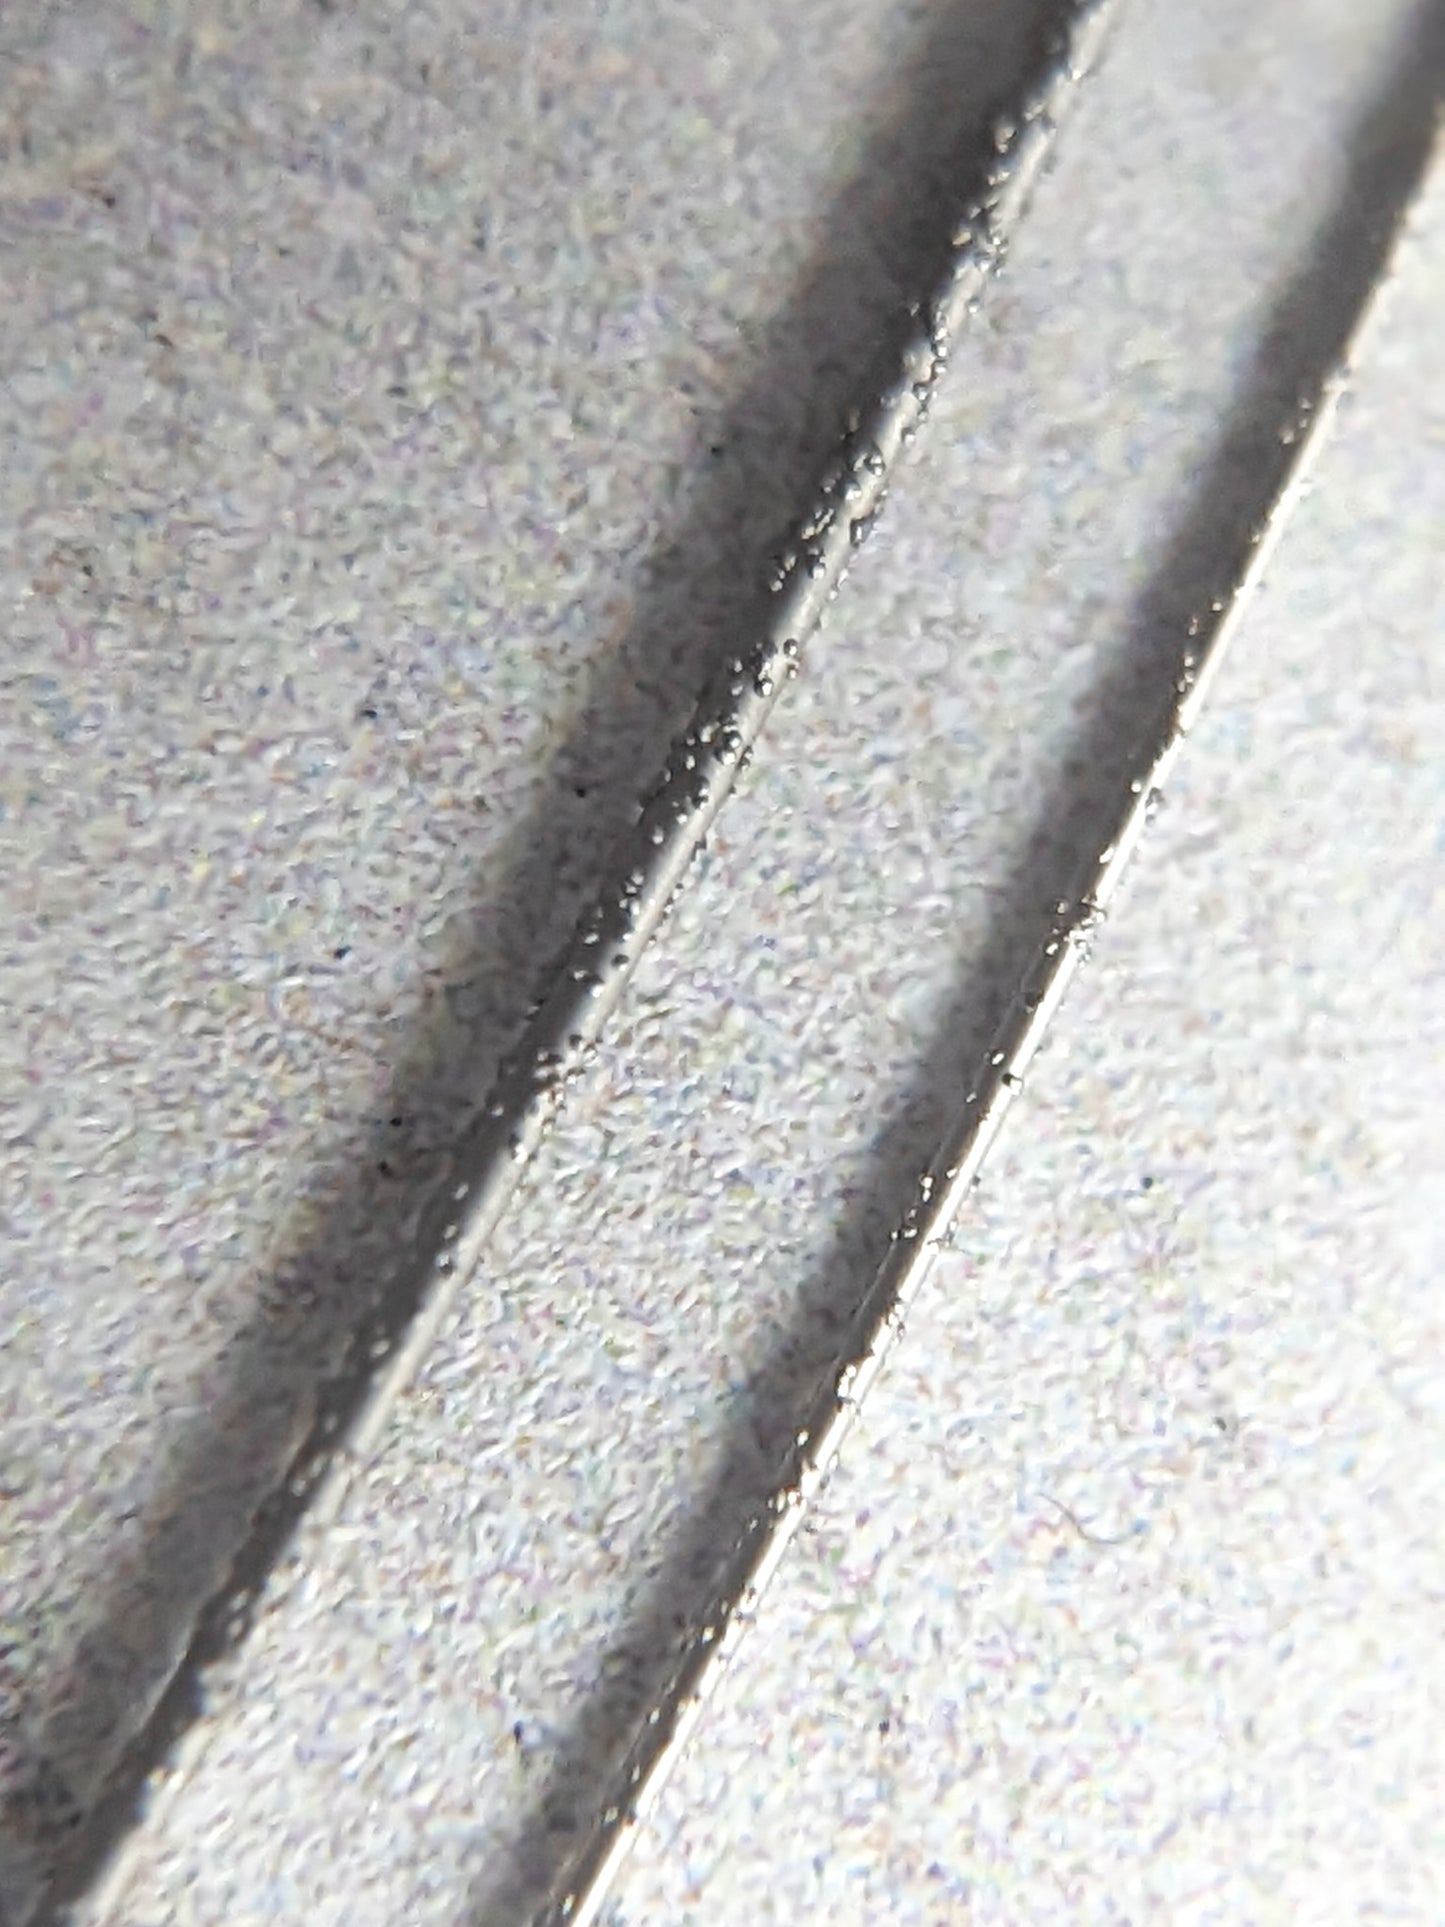 0.25mm and 0.35mm diamond wire blades